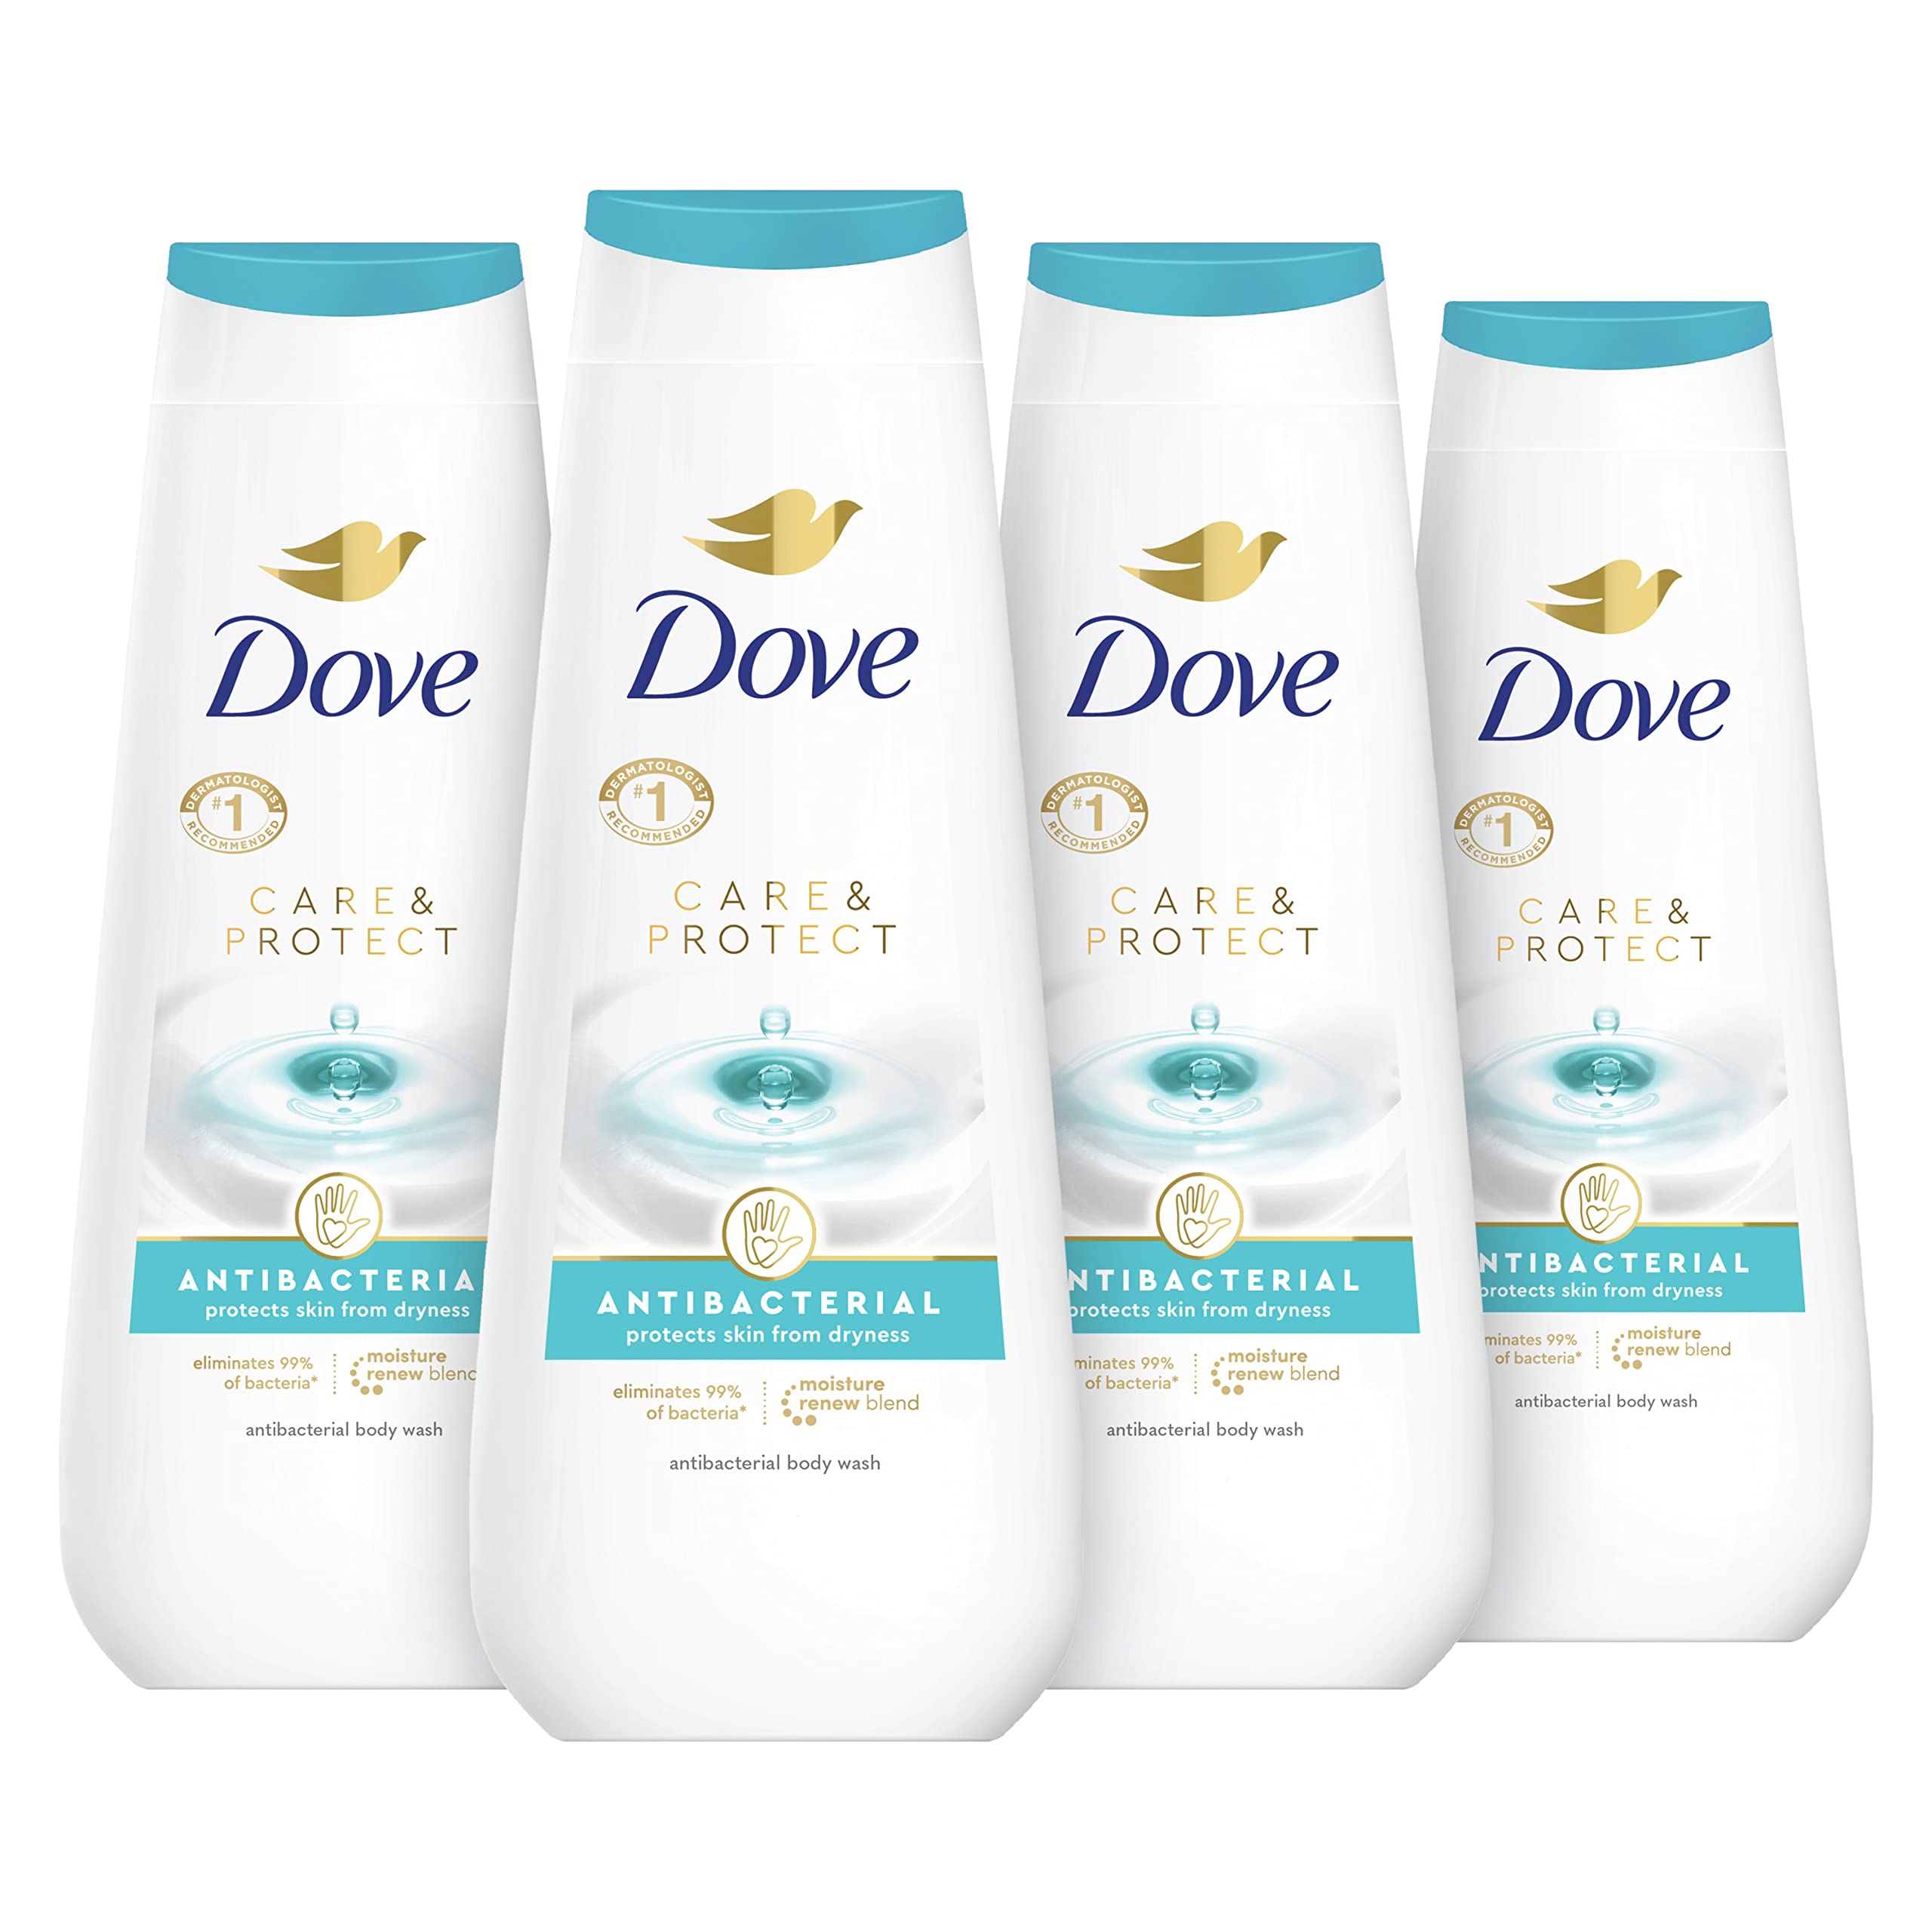 Dove Body Wash Care & Protect Antibacterial 4 Count For All Skin Types Protects from Dryness 20 oz